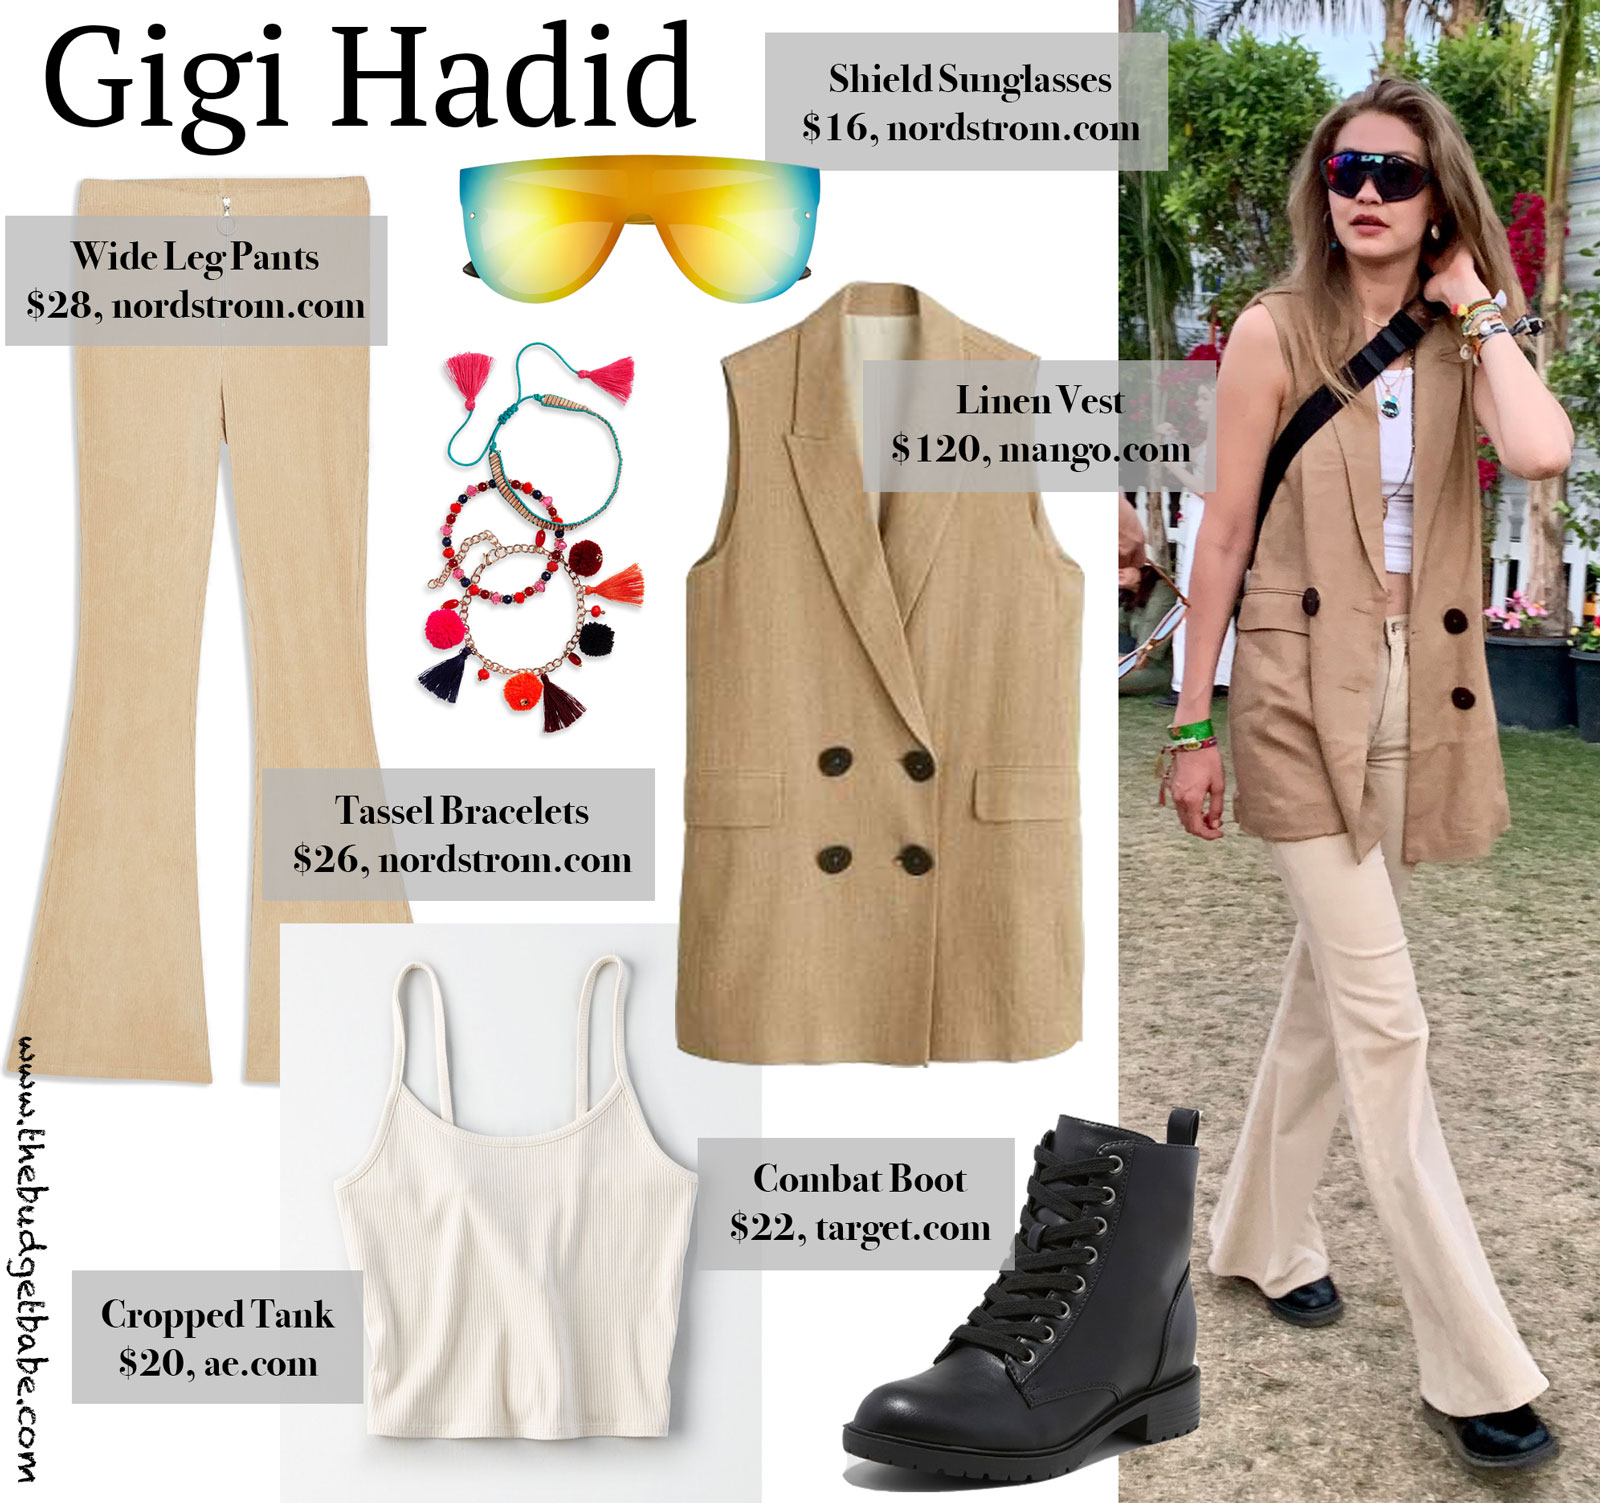 Gigi Hadid Tan Vest and Wide Leg Pants Look for Less